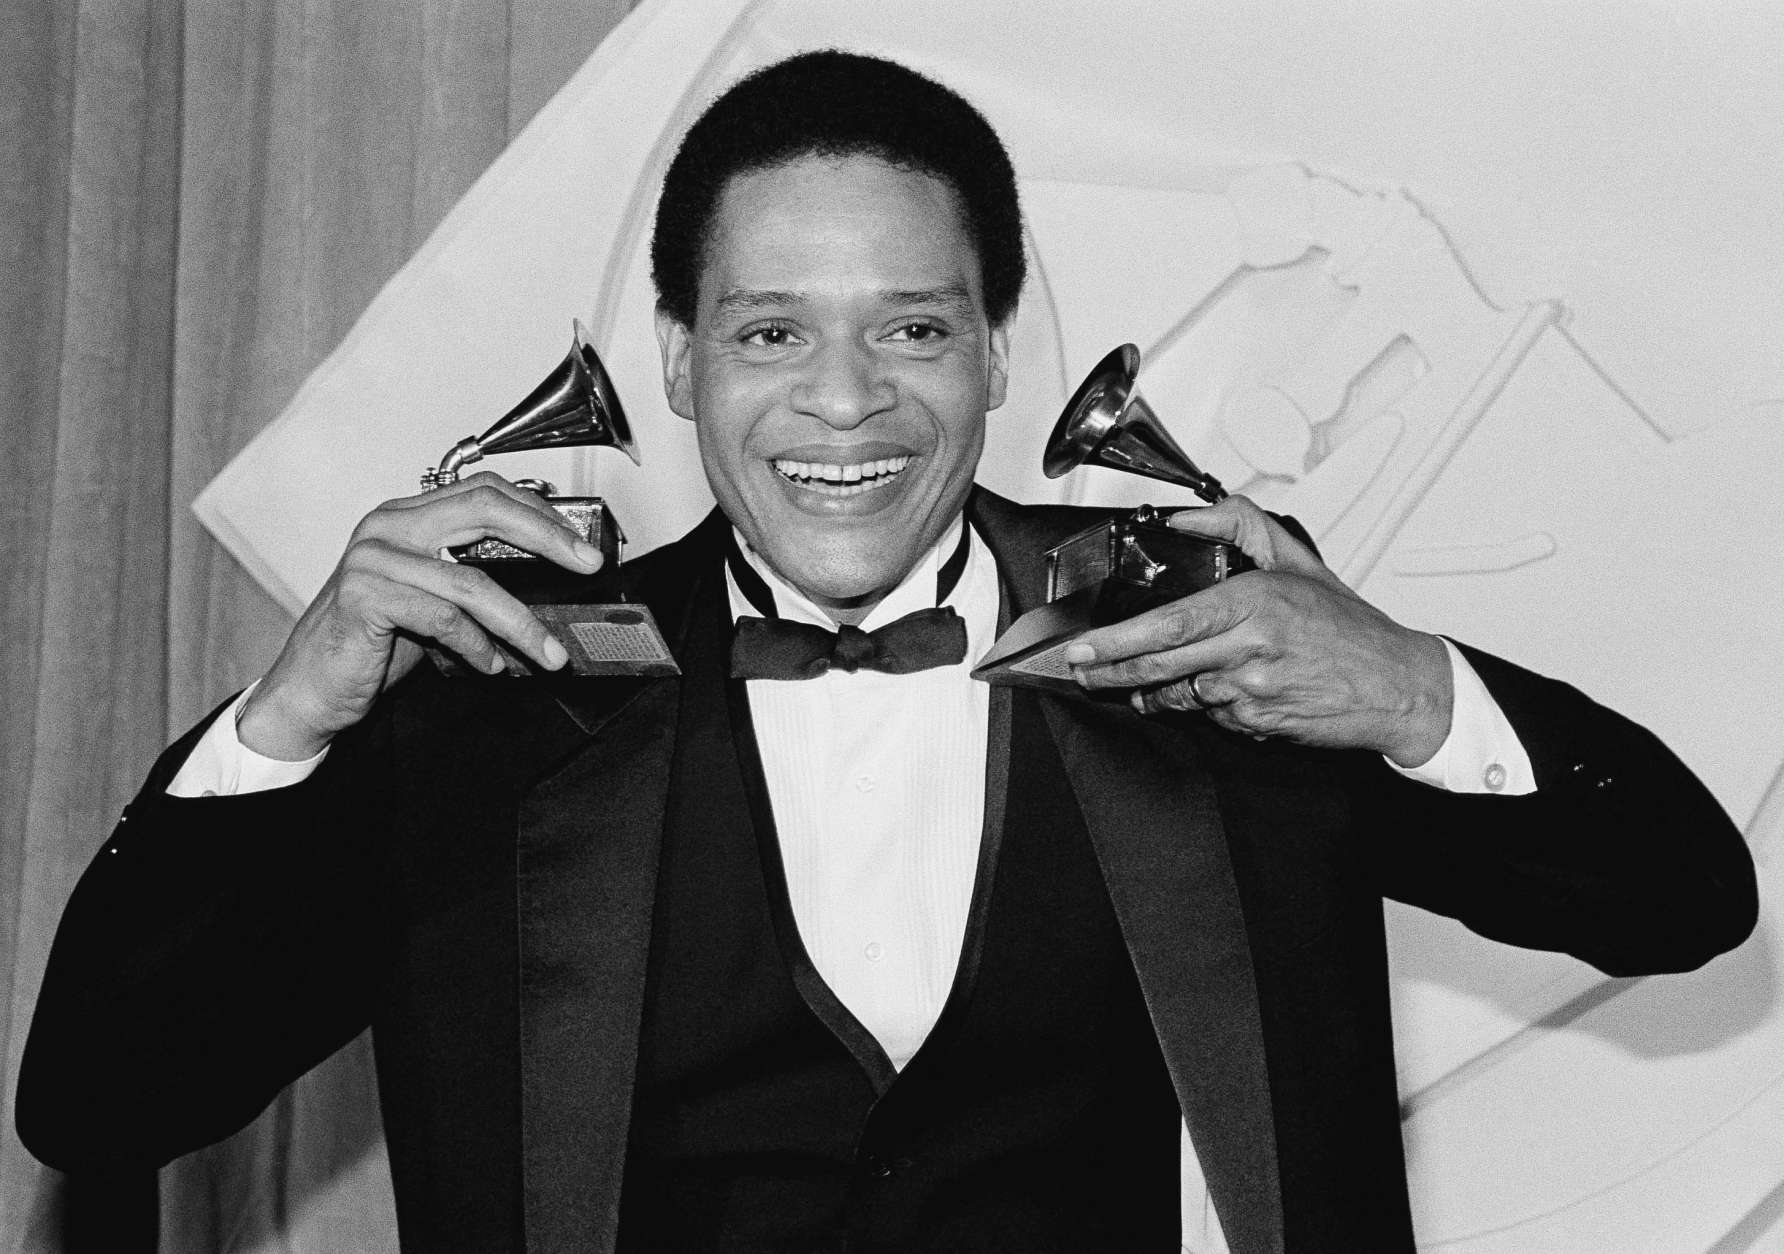 Singer Al Jarreau has more than an earful as he holds up his Grammy he won during the 24th annual Grammy Awards presentation in Los Angeles Wednesday night, Feb. 25, 1982. Jarreau won the honors for best pop male vocalist and best jazz male vocalist. (AP Photo/Reed Saxon)